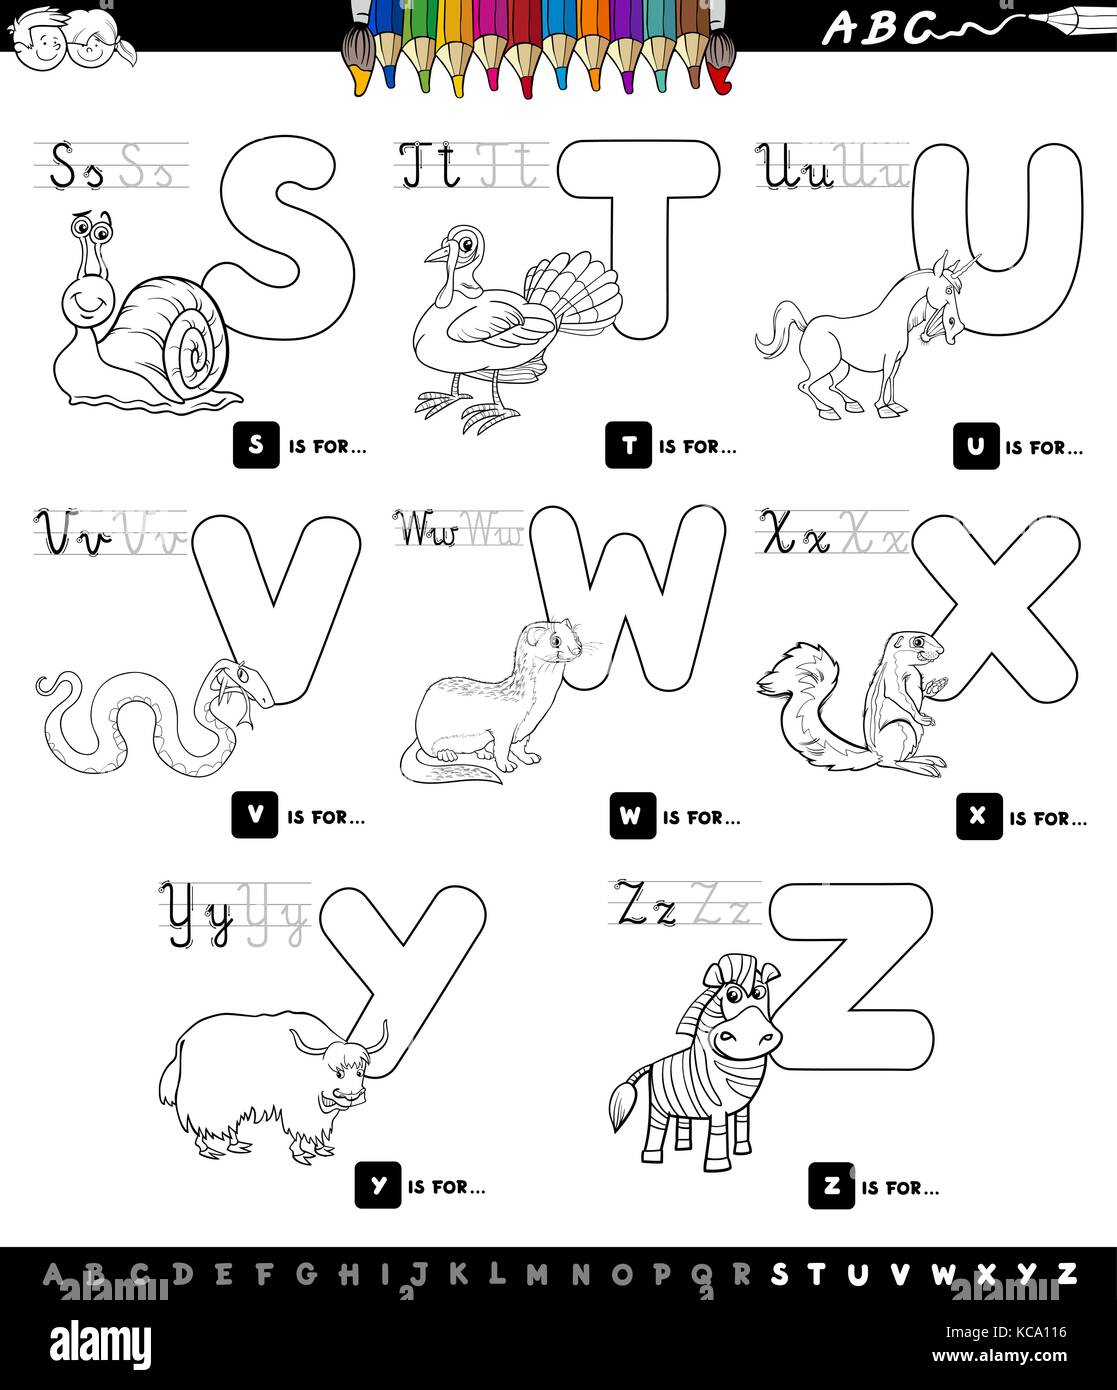 Black and White Cartoon Illustration of Capital Letters Alphabet Set with Animal Characters for Reading and Writing Education for Children from S to Z Stock Vector